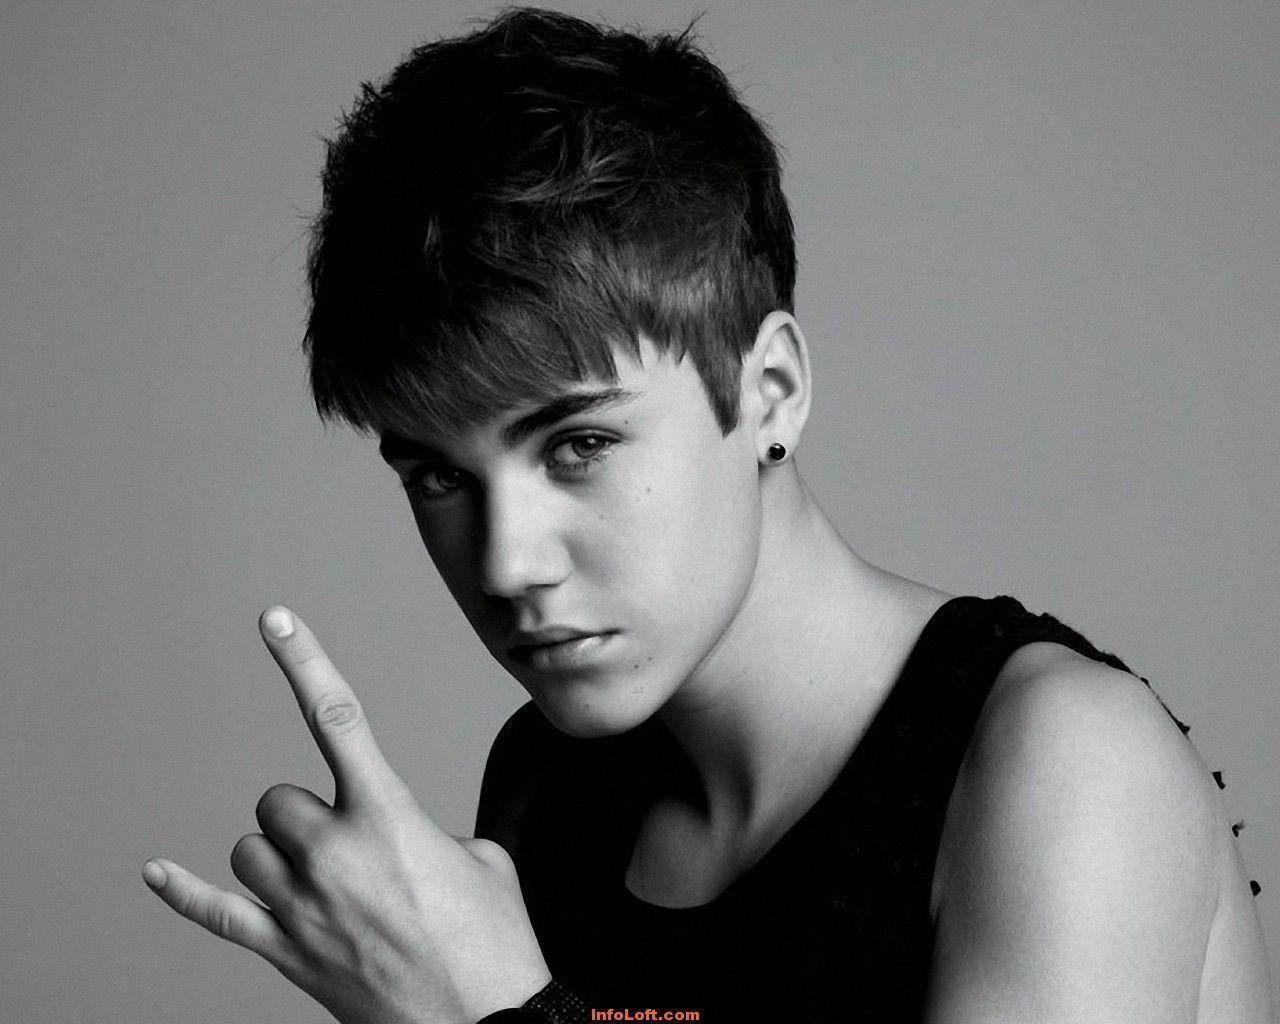 Justin Bieber HD Wallpaper and Background